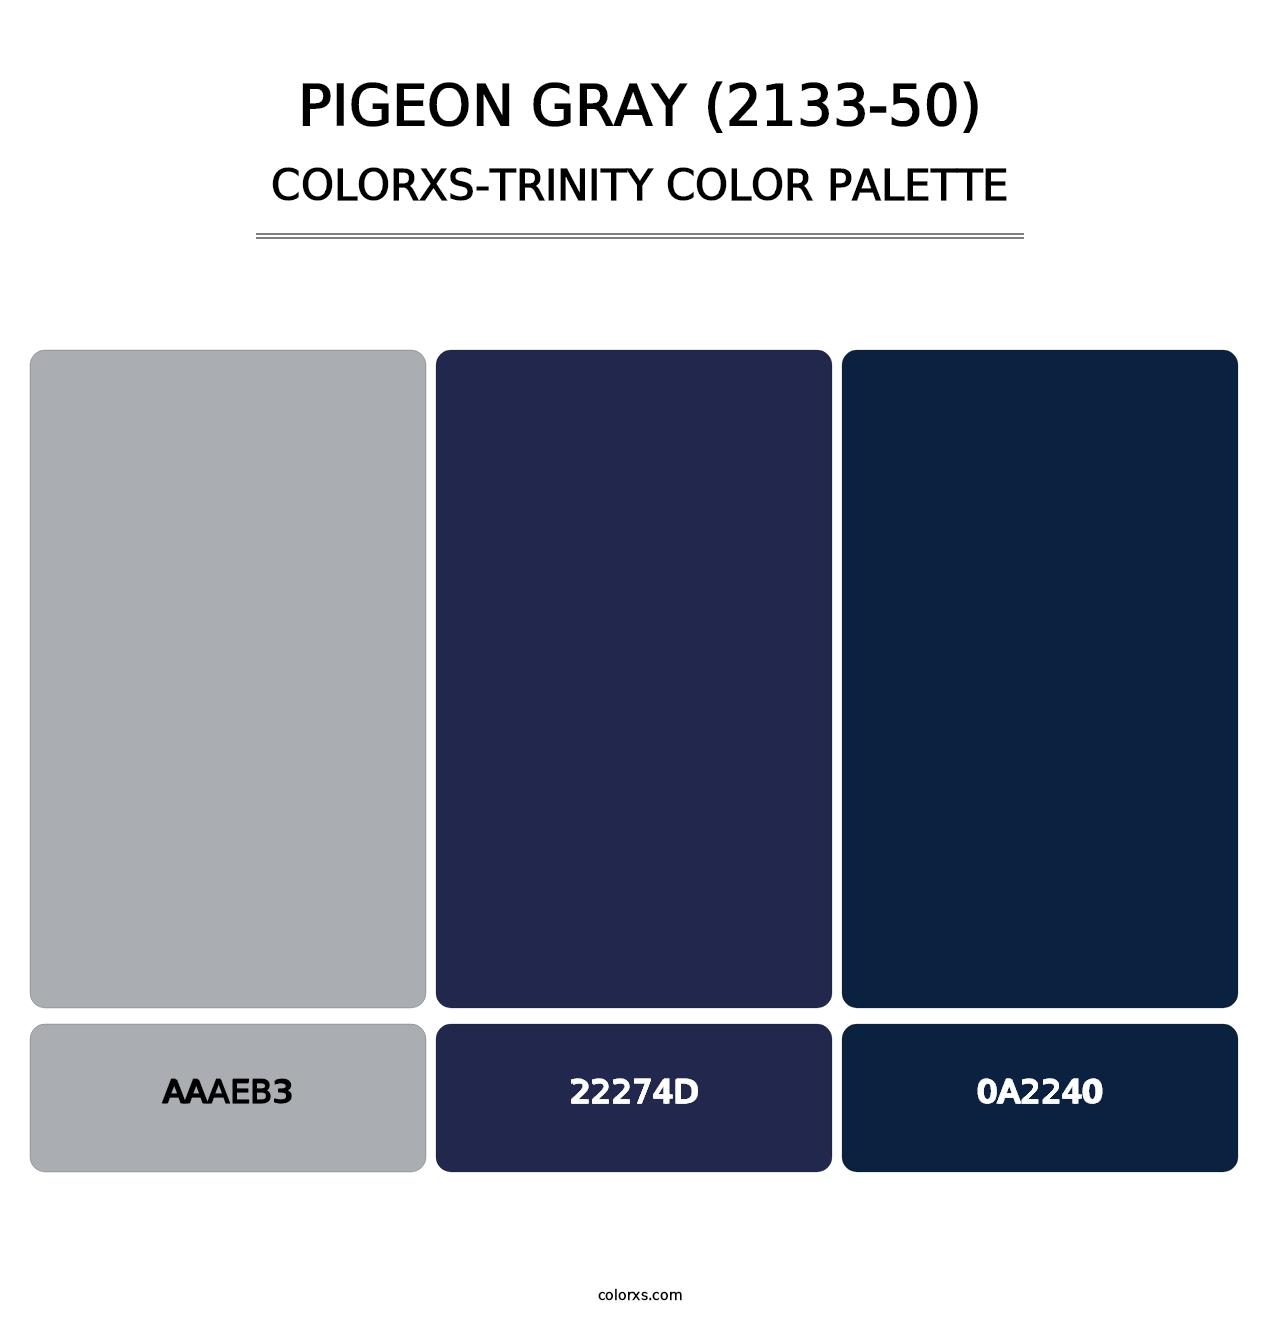 Pigeon Gray (2133-50) - Colorxs Trinity Palette